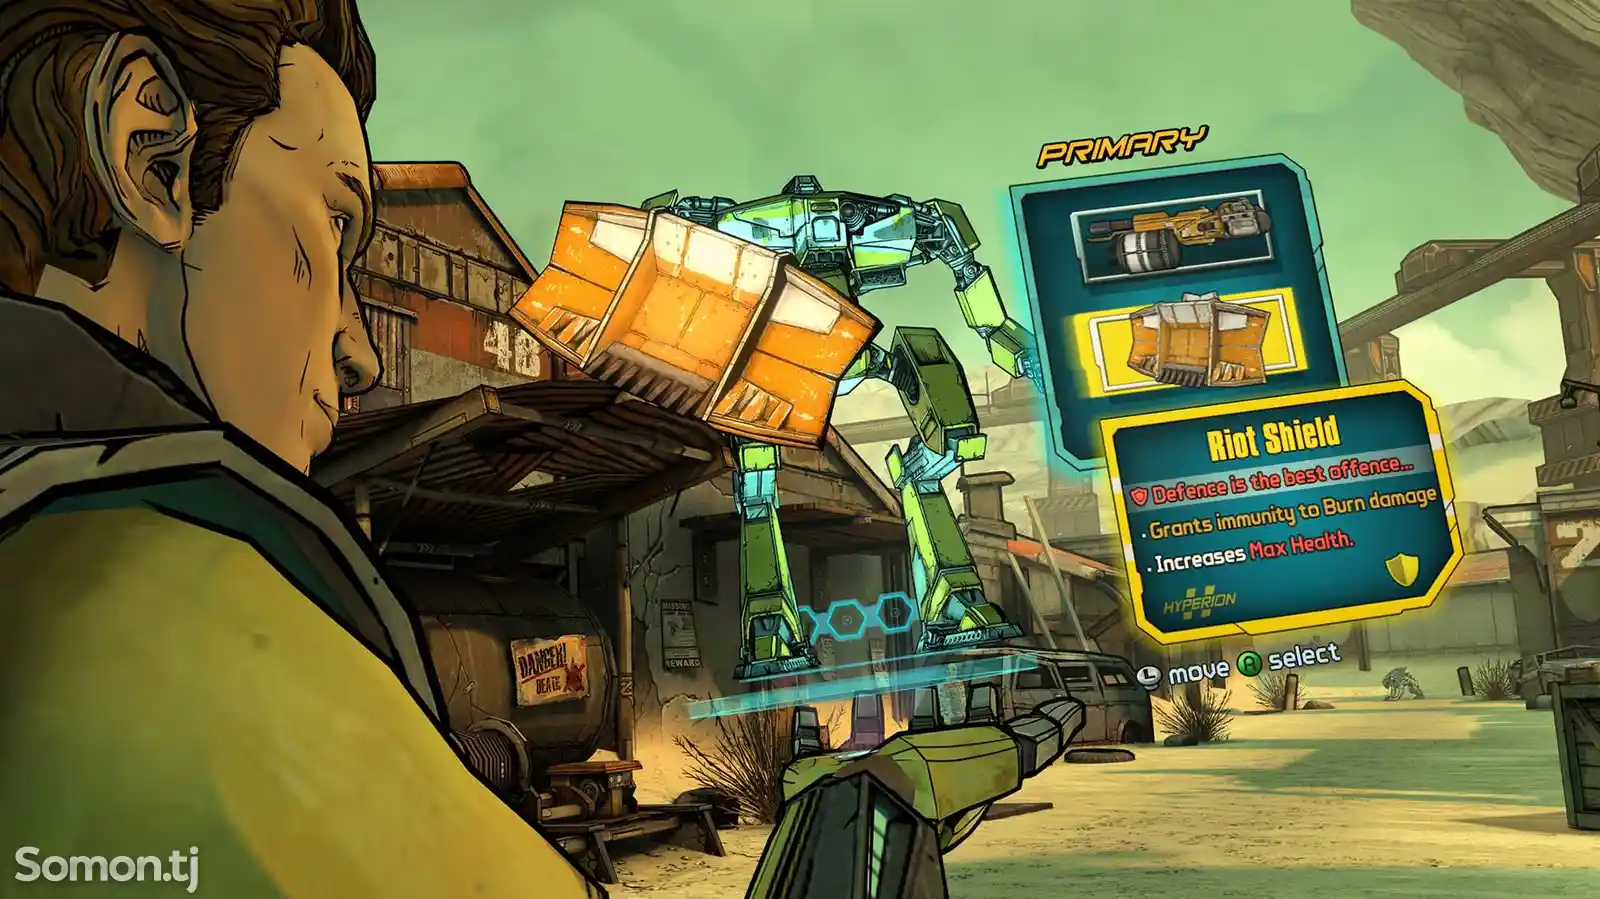 Игра New tales from the borderlands для PS-4 / 5.05 / 6.72 / 7.02 / 9.00 /-2